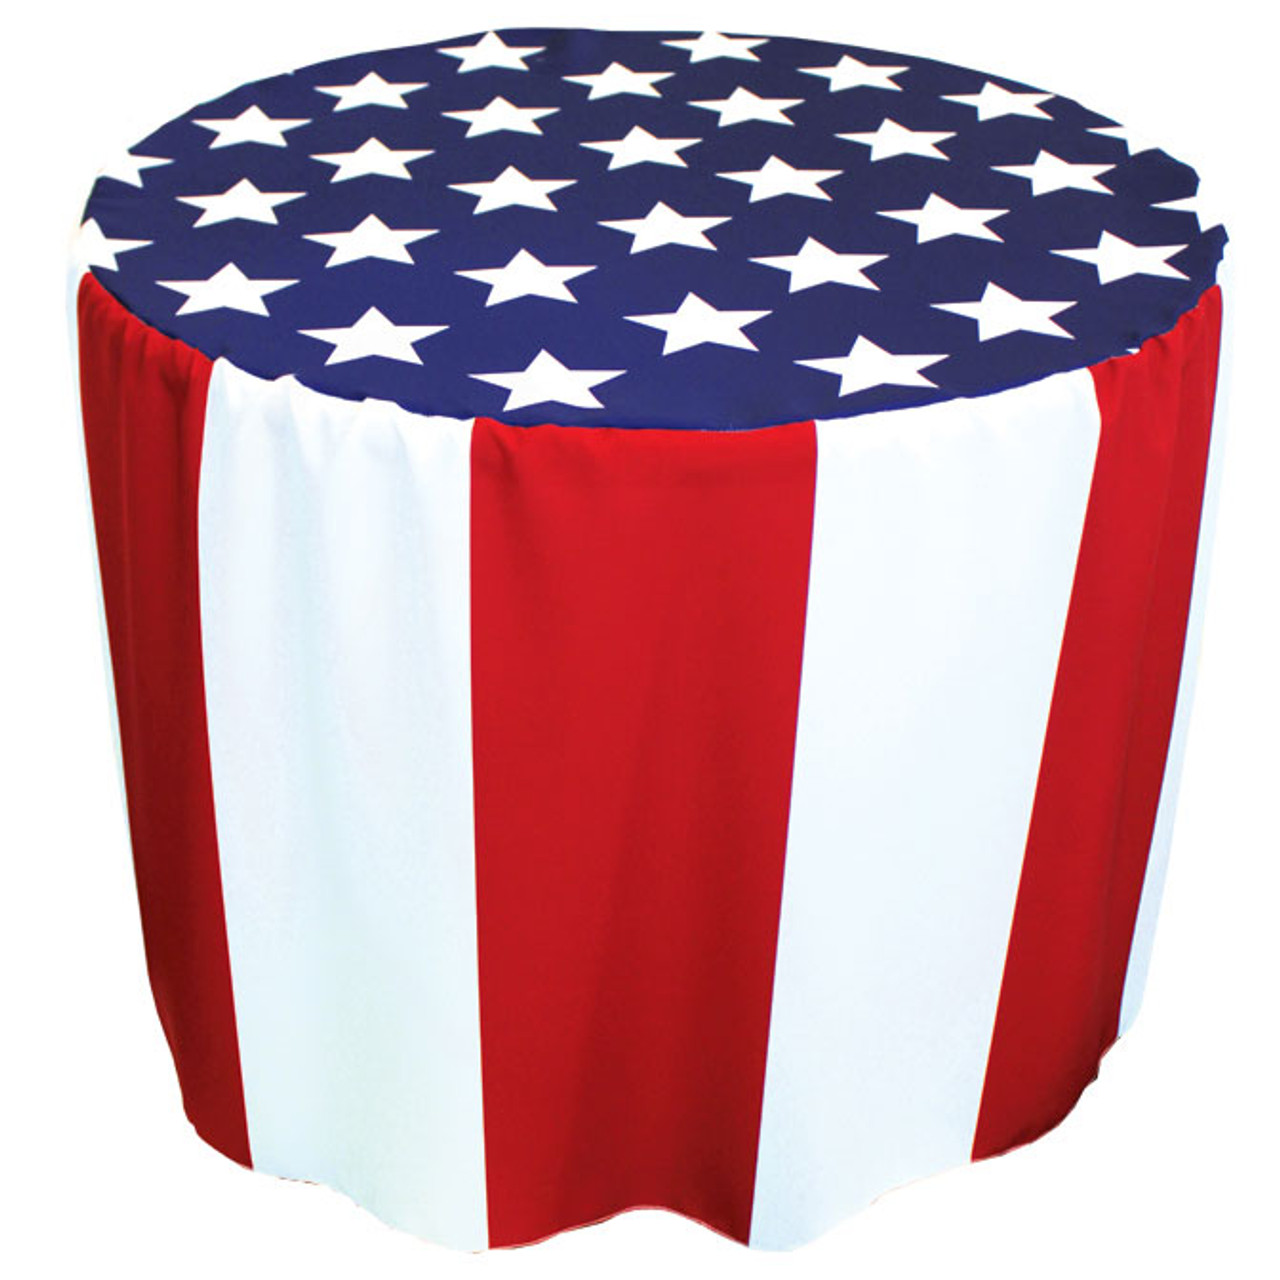 36" x 29" custom printed round table cover made from woven polyester covering table underneath.